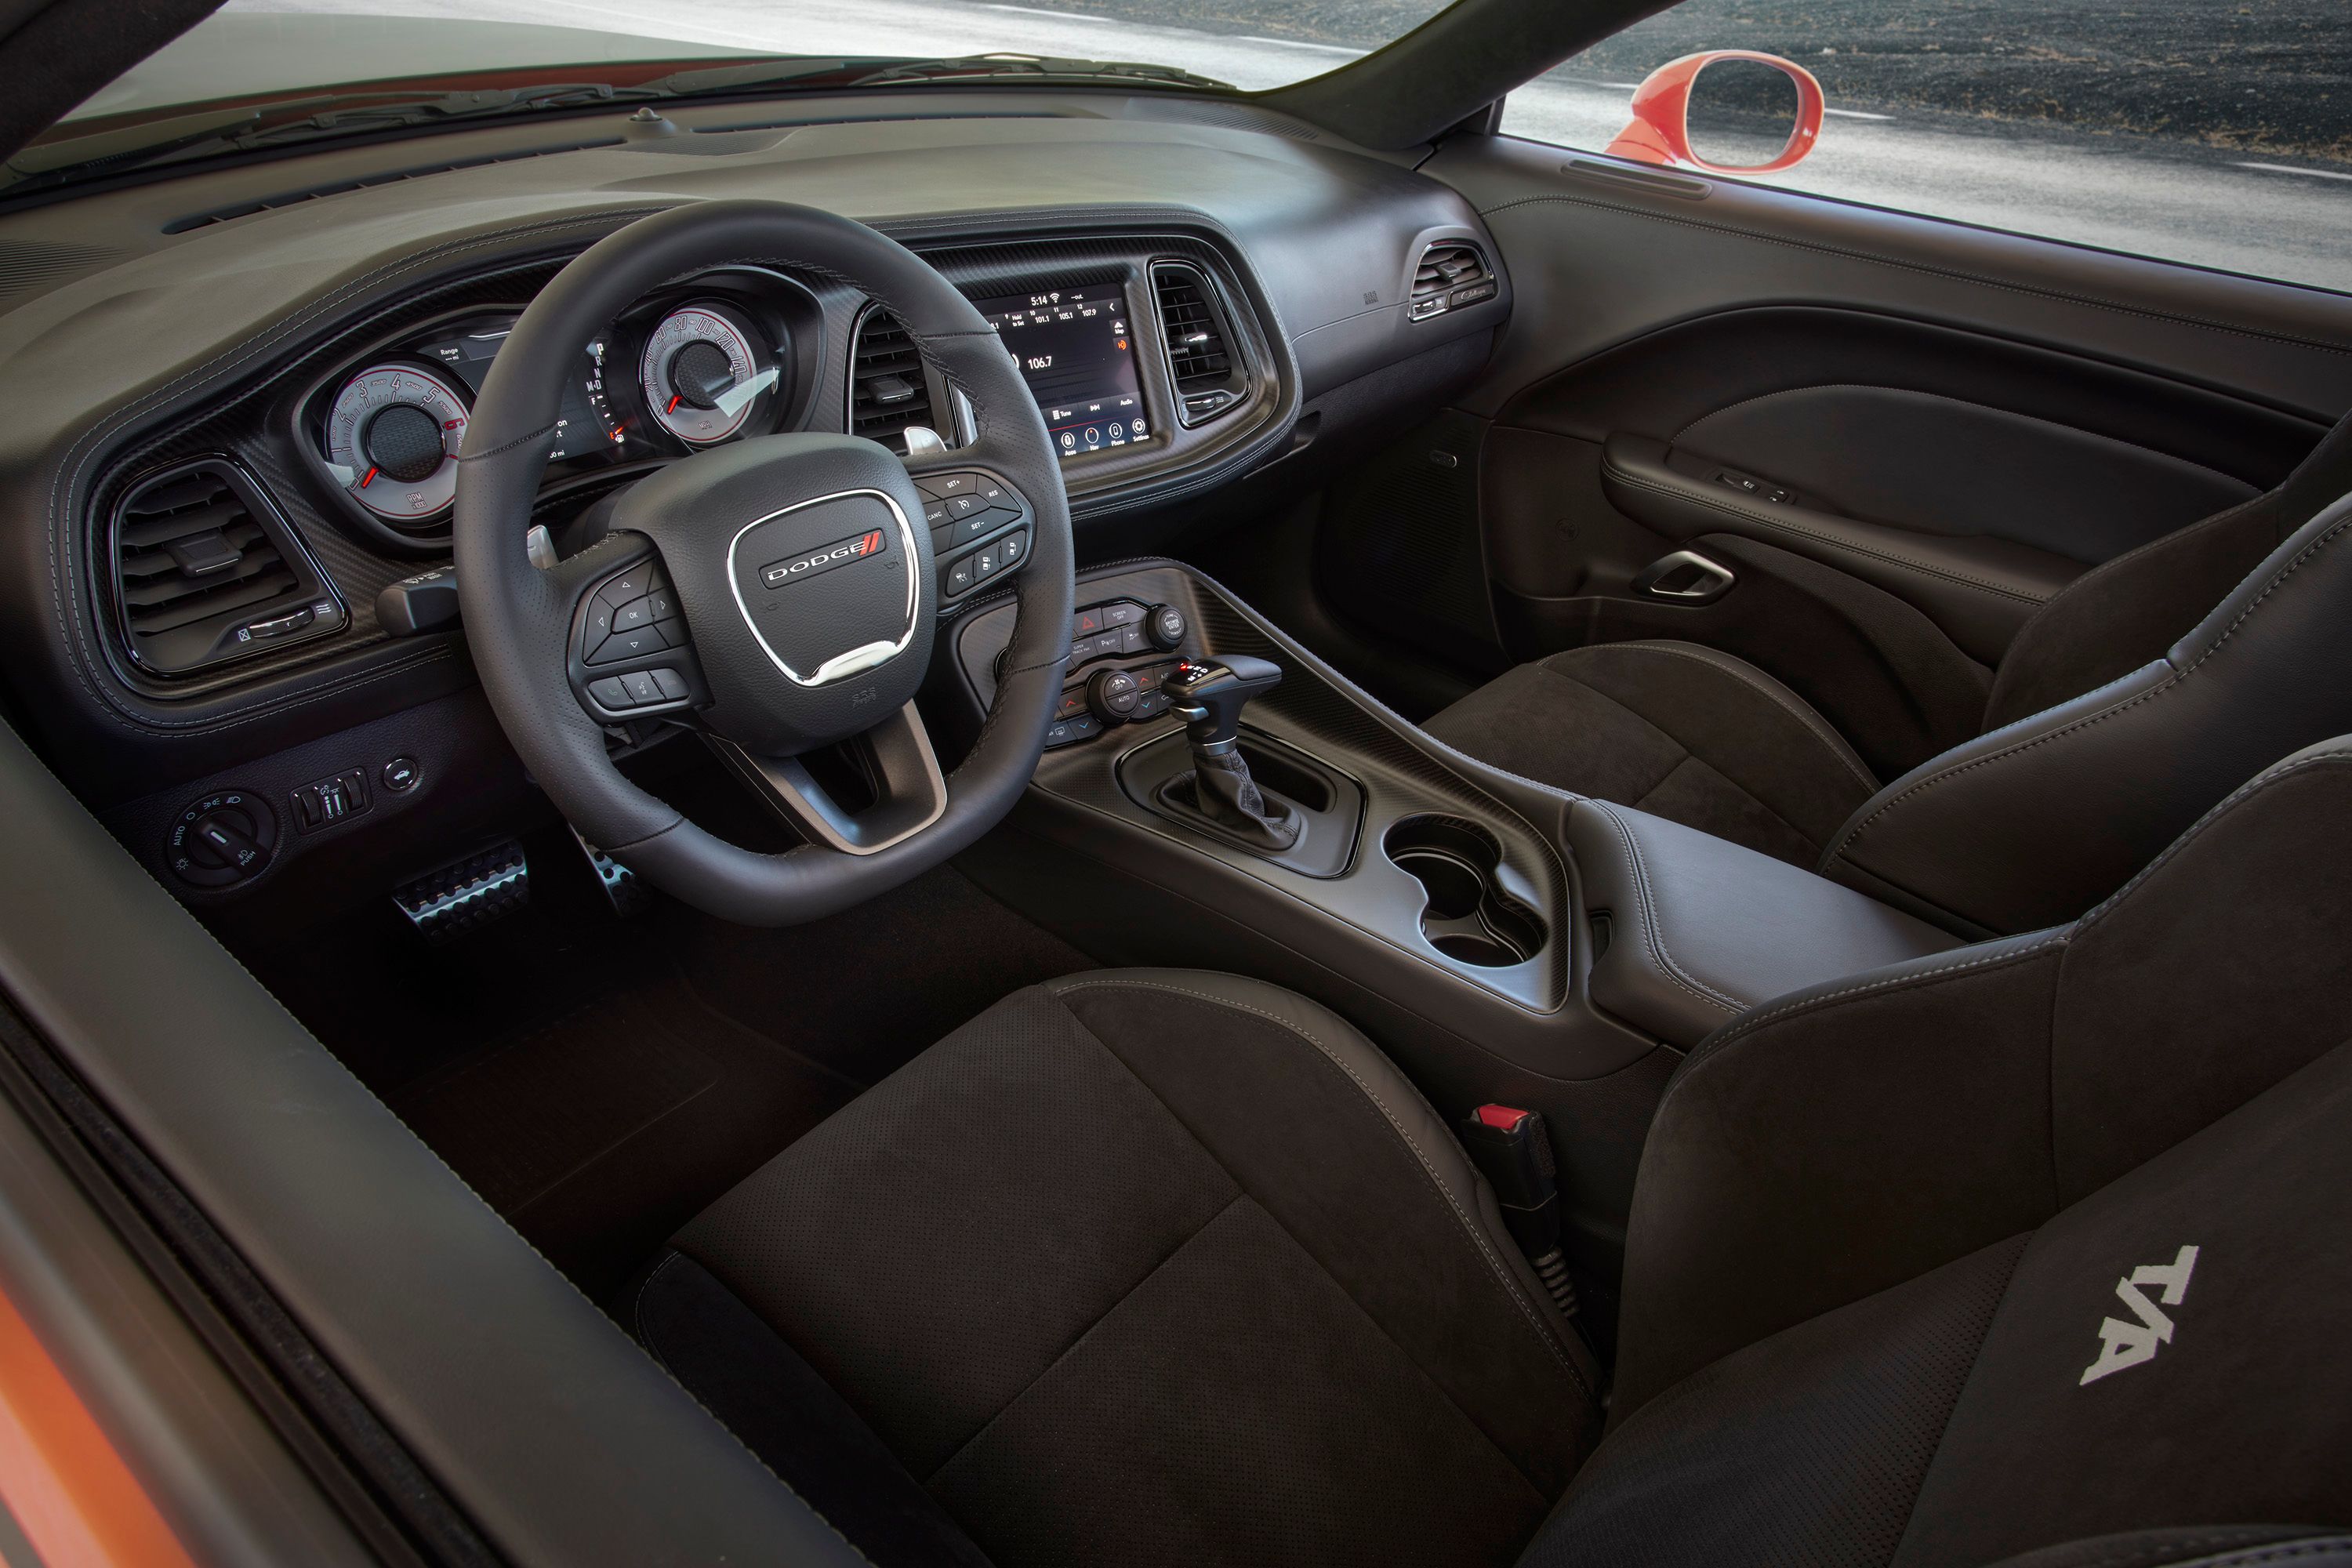 The interior of the Scat Pack Dodge Challenger.